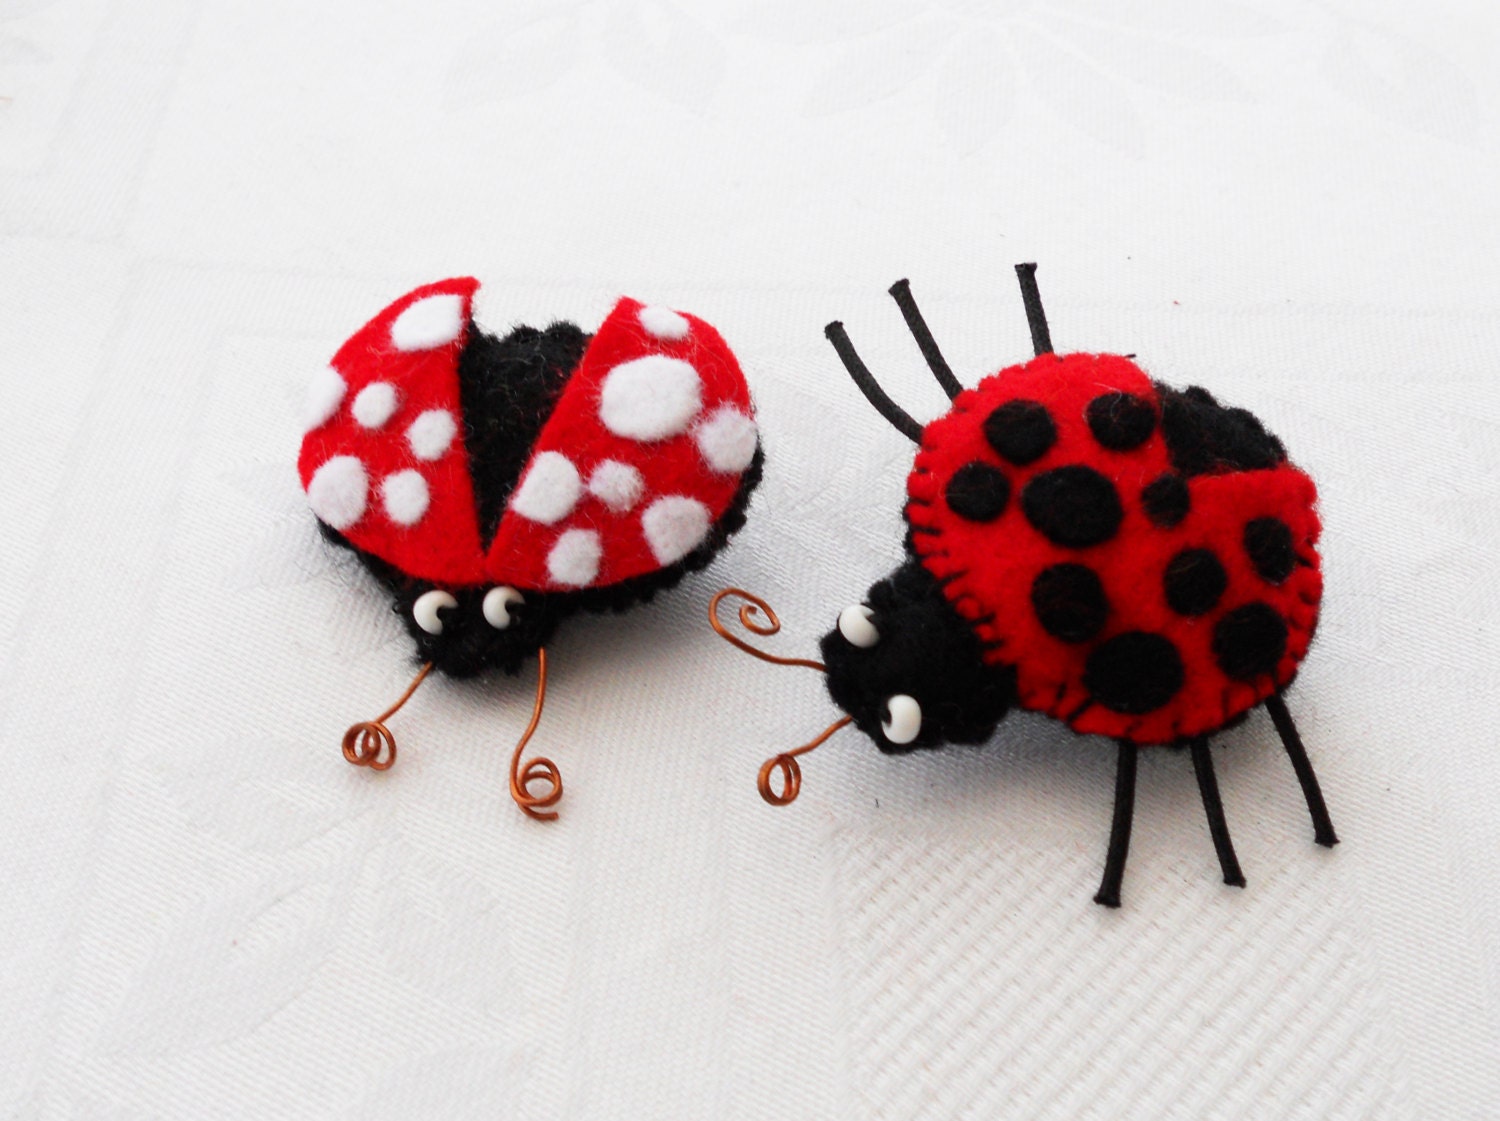 Ladybugs Ladybirds Brooches FIVE Brooches Easter Spring Pins Felted Brooches Kids Jewelry Red Black White Spring Made To Order - oddandcurious